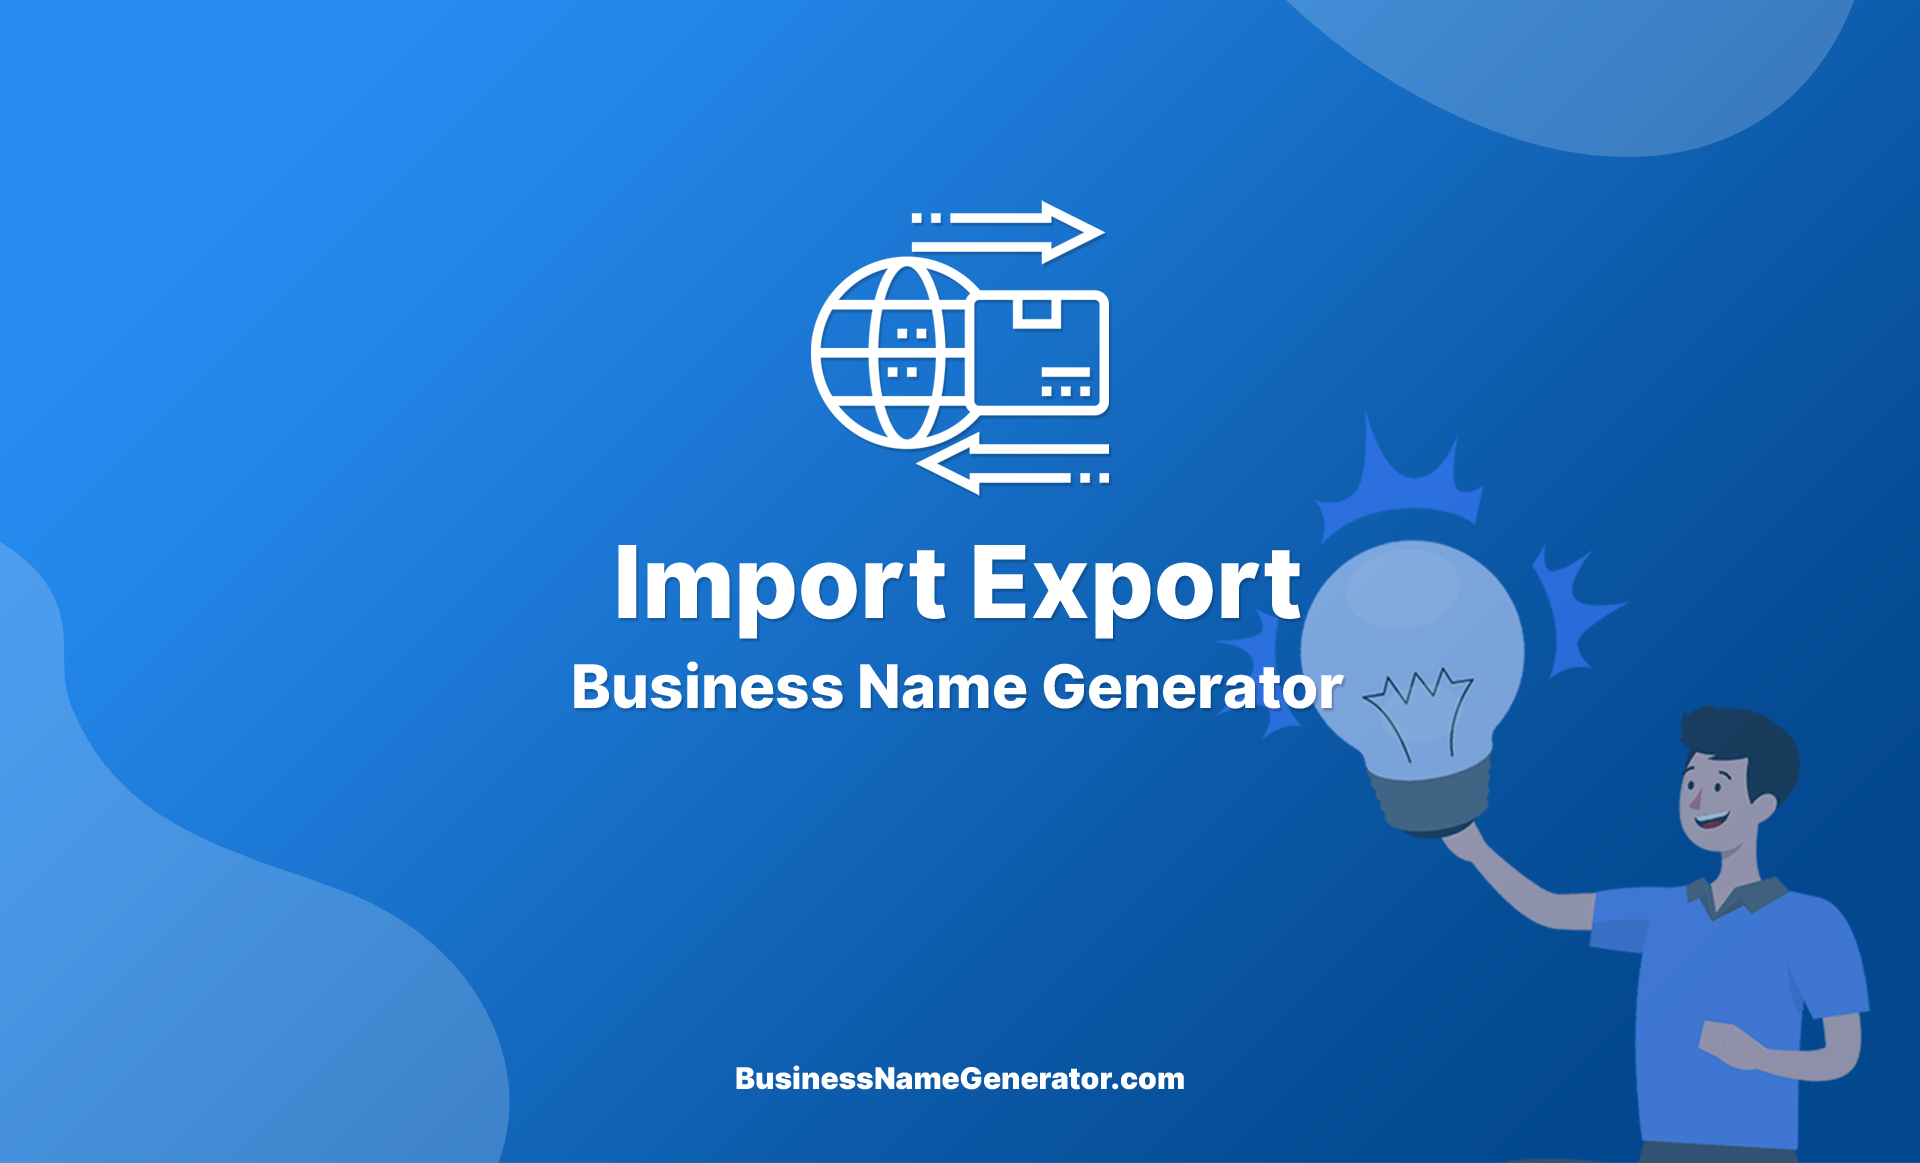 Export Business Name Generator Guide & Ideas